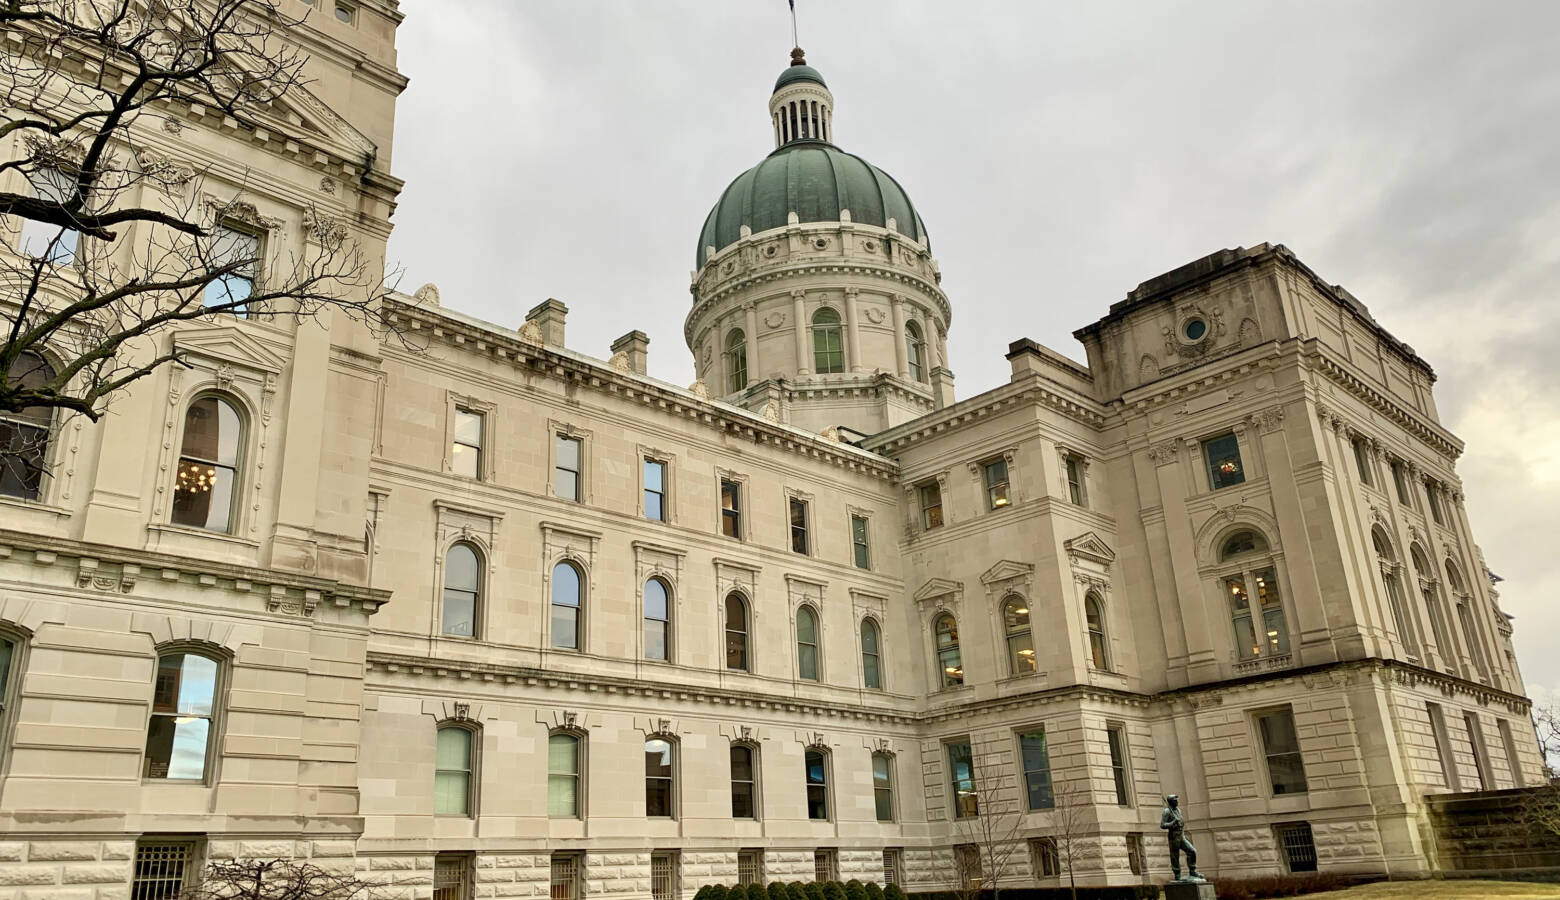 It will be significantly harder to get married under age 18 in Indiana if a bill approved by a House committee becomes law. (Brandon Smith/IPB News)